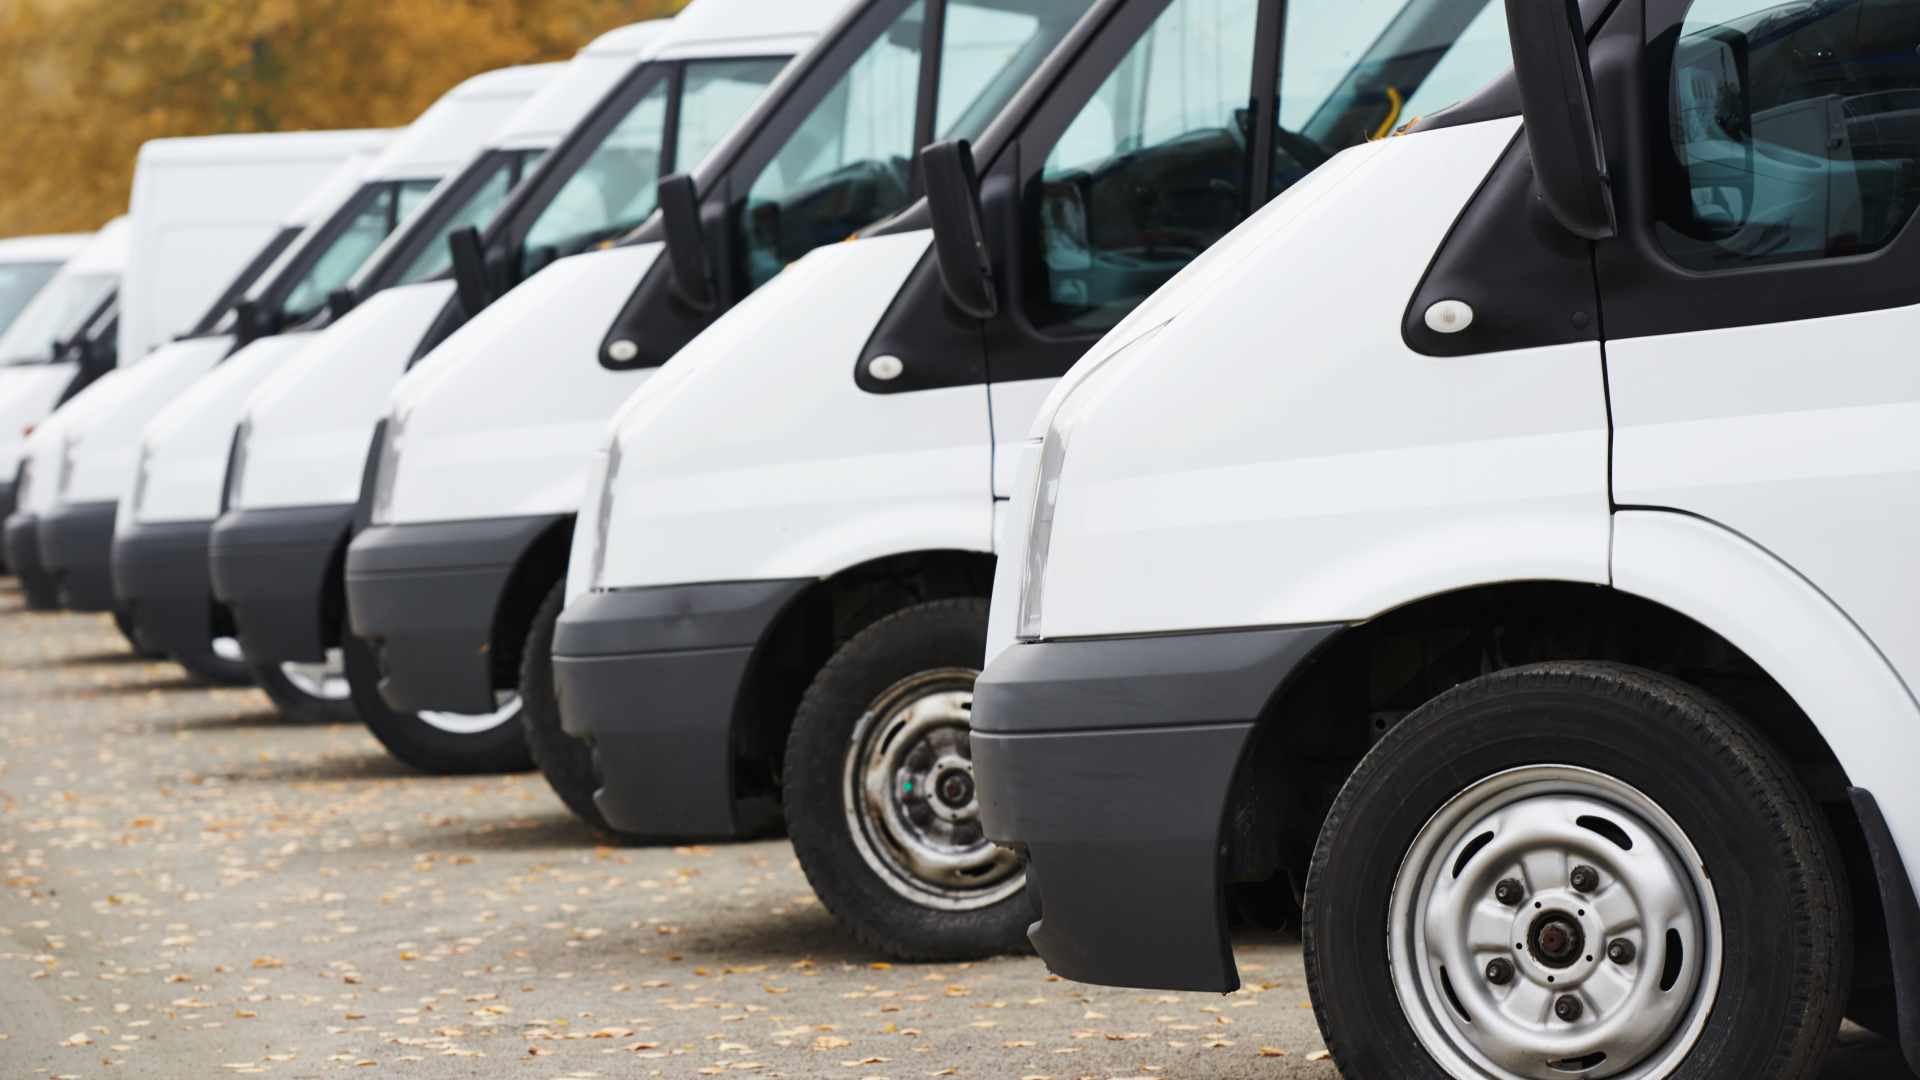 Commercial delivery vans in row at parking place